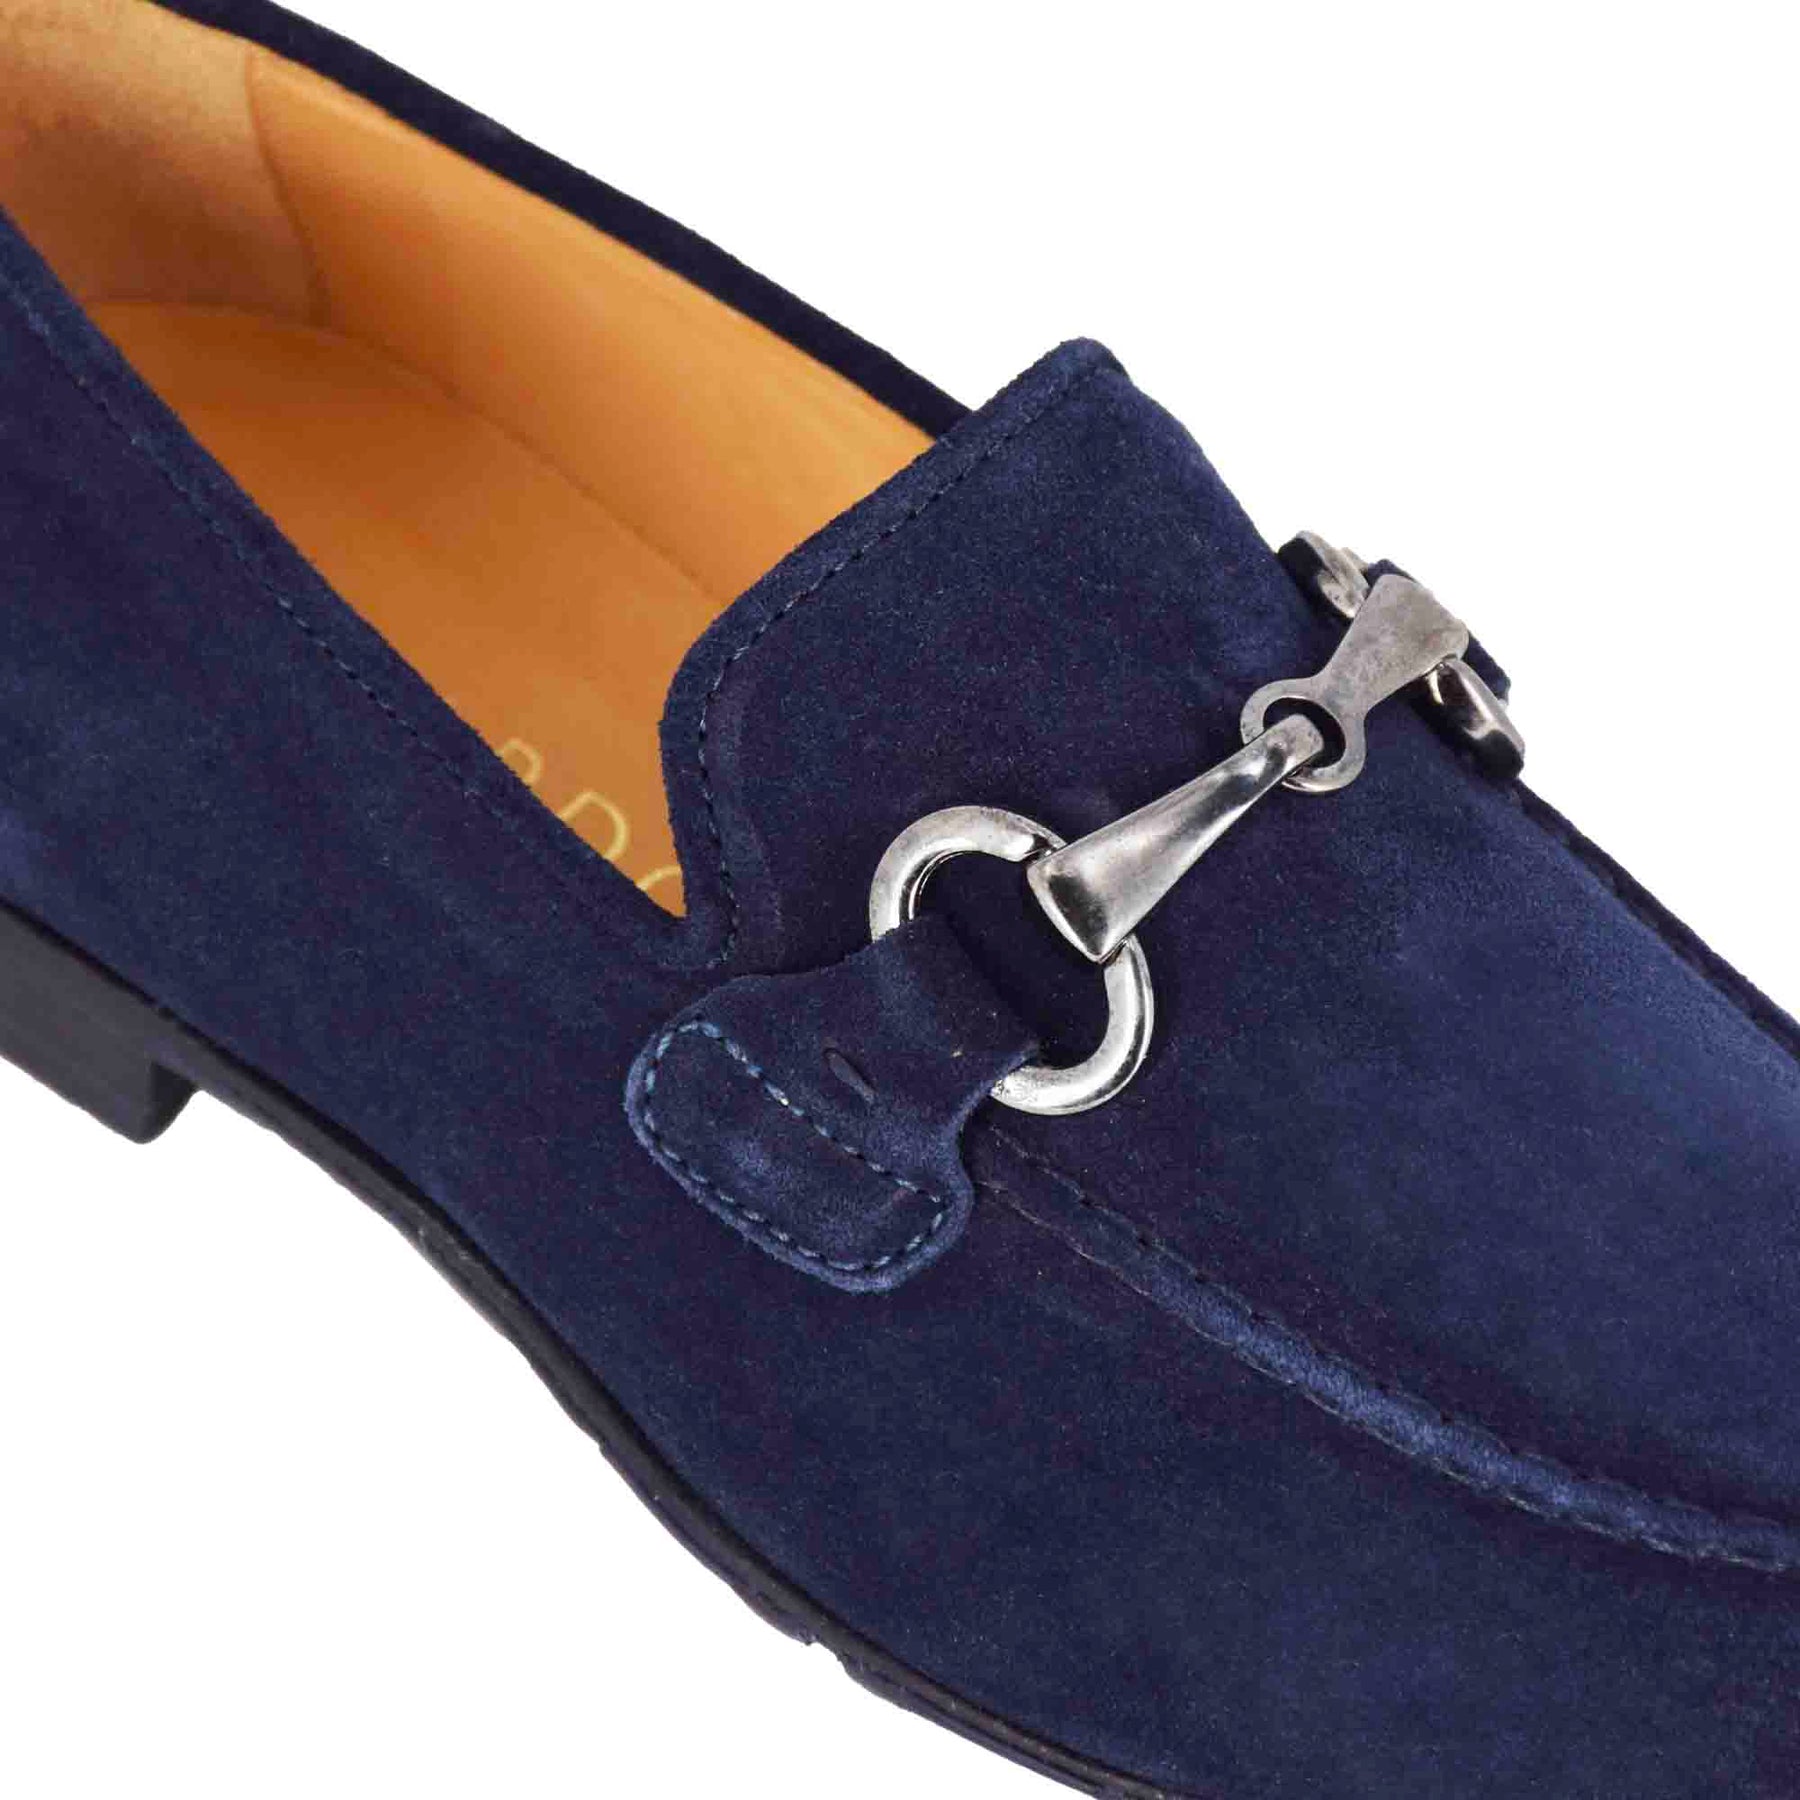 Men's moccasin in blue suede with silver clamp